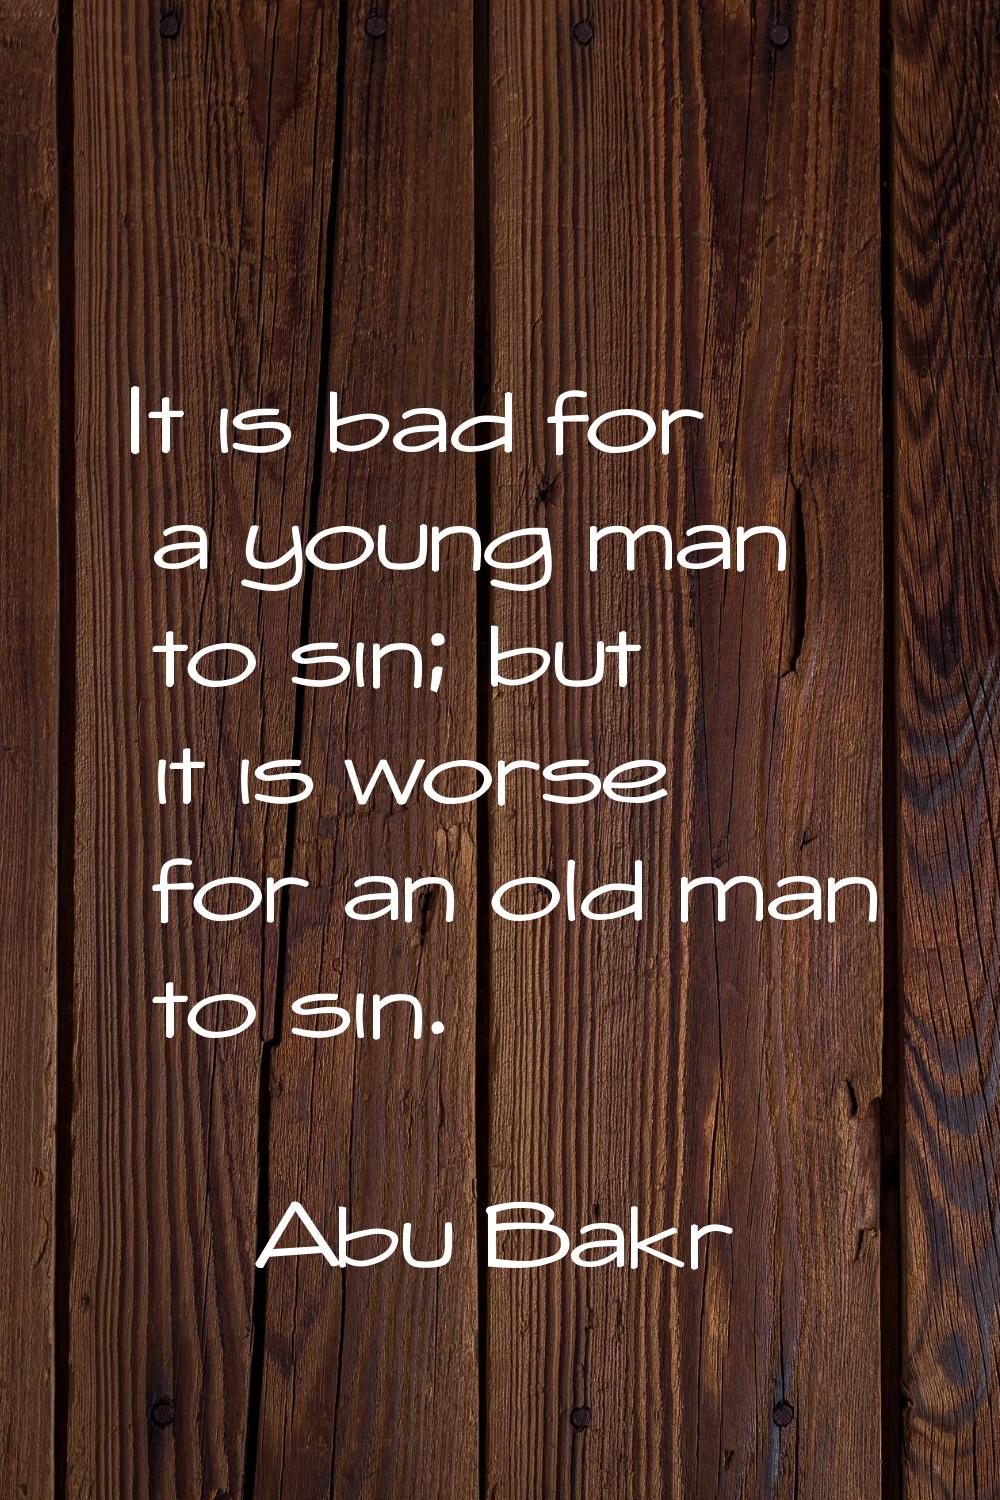 It is bad for a young man to sin; but it is worse for an old man to sin.